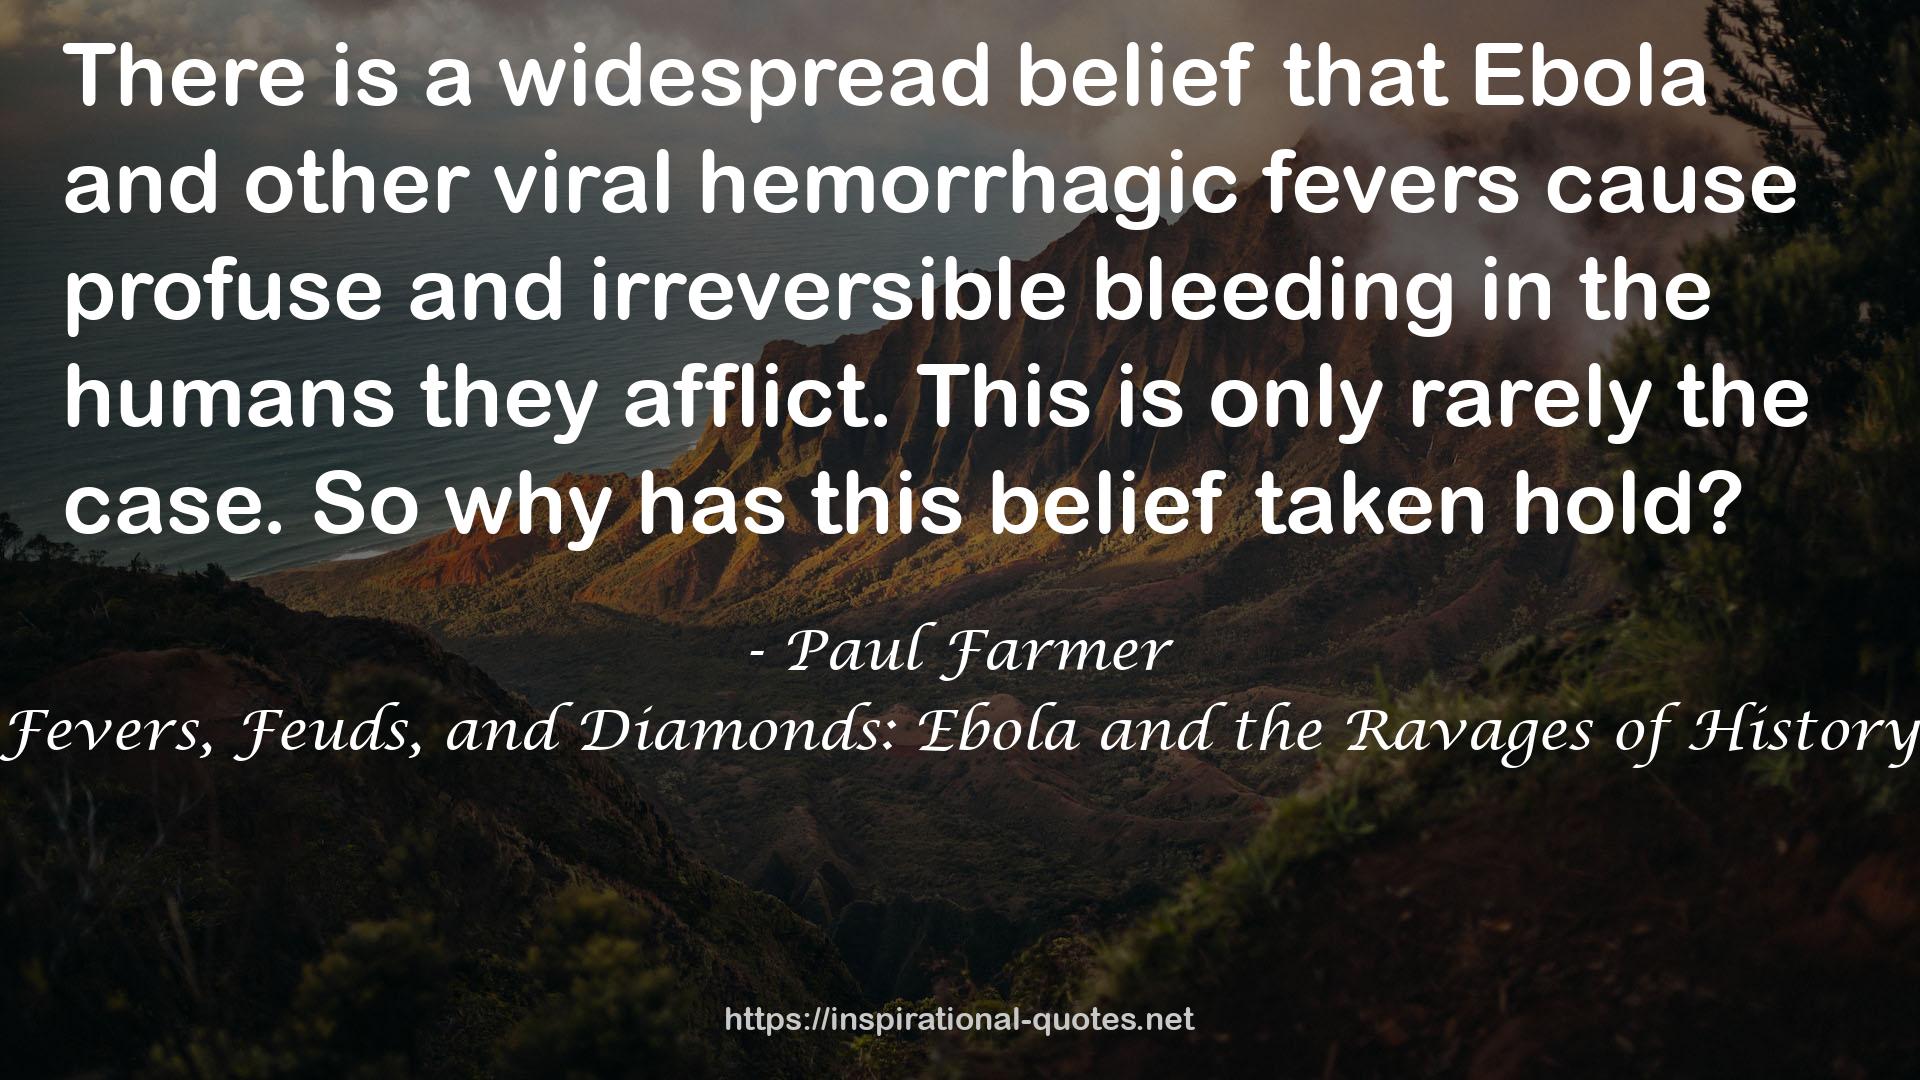 Fevers, Feuds, and Diamonds: Ebola and the Ravages of History QUOTES